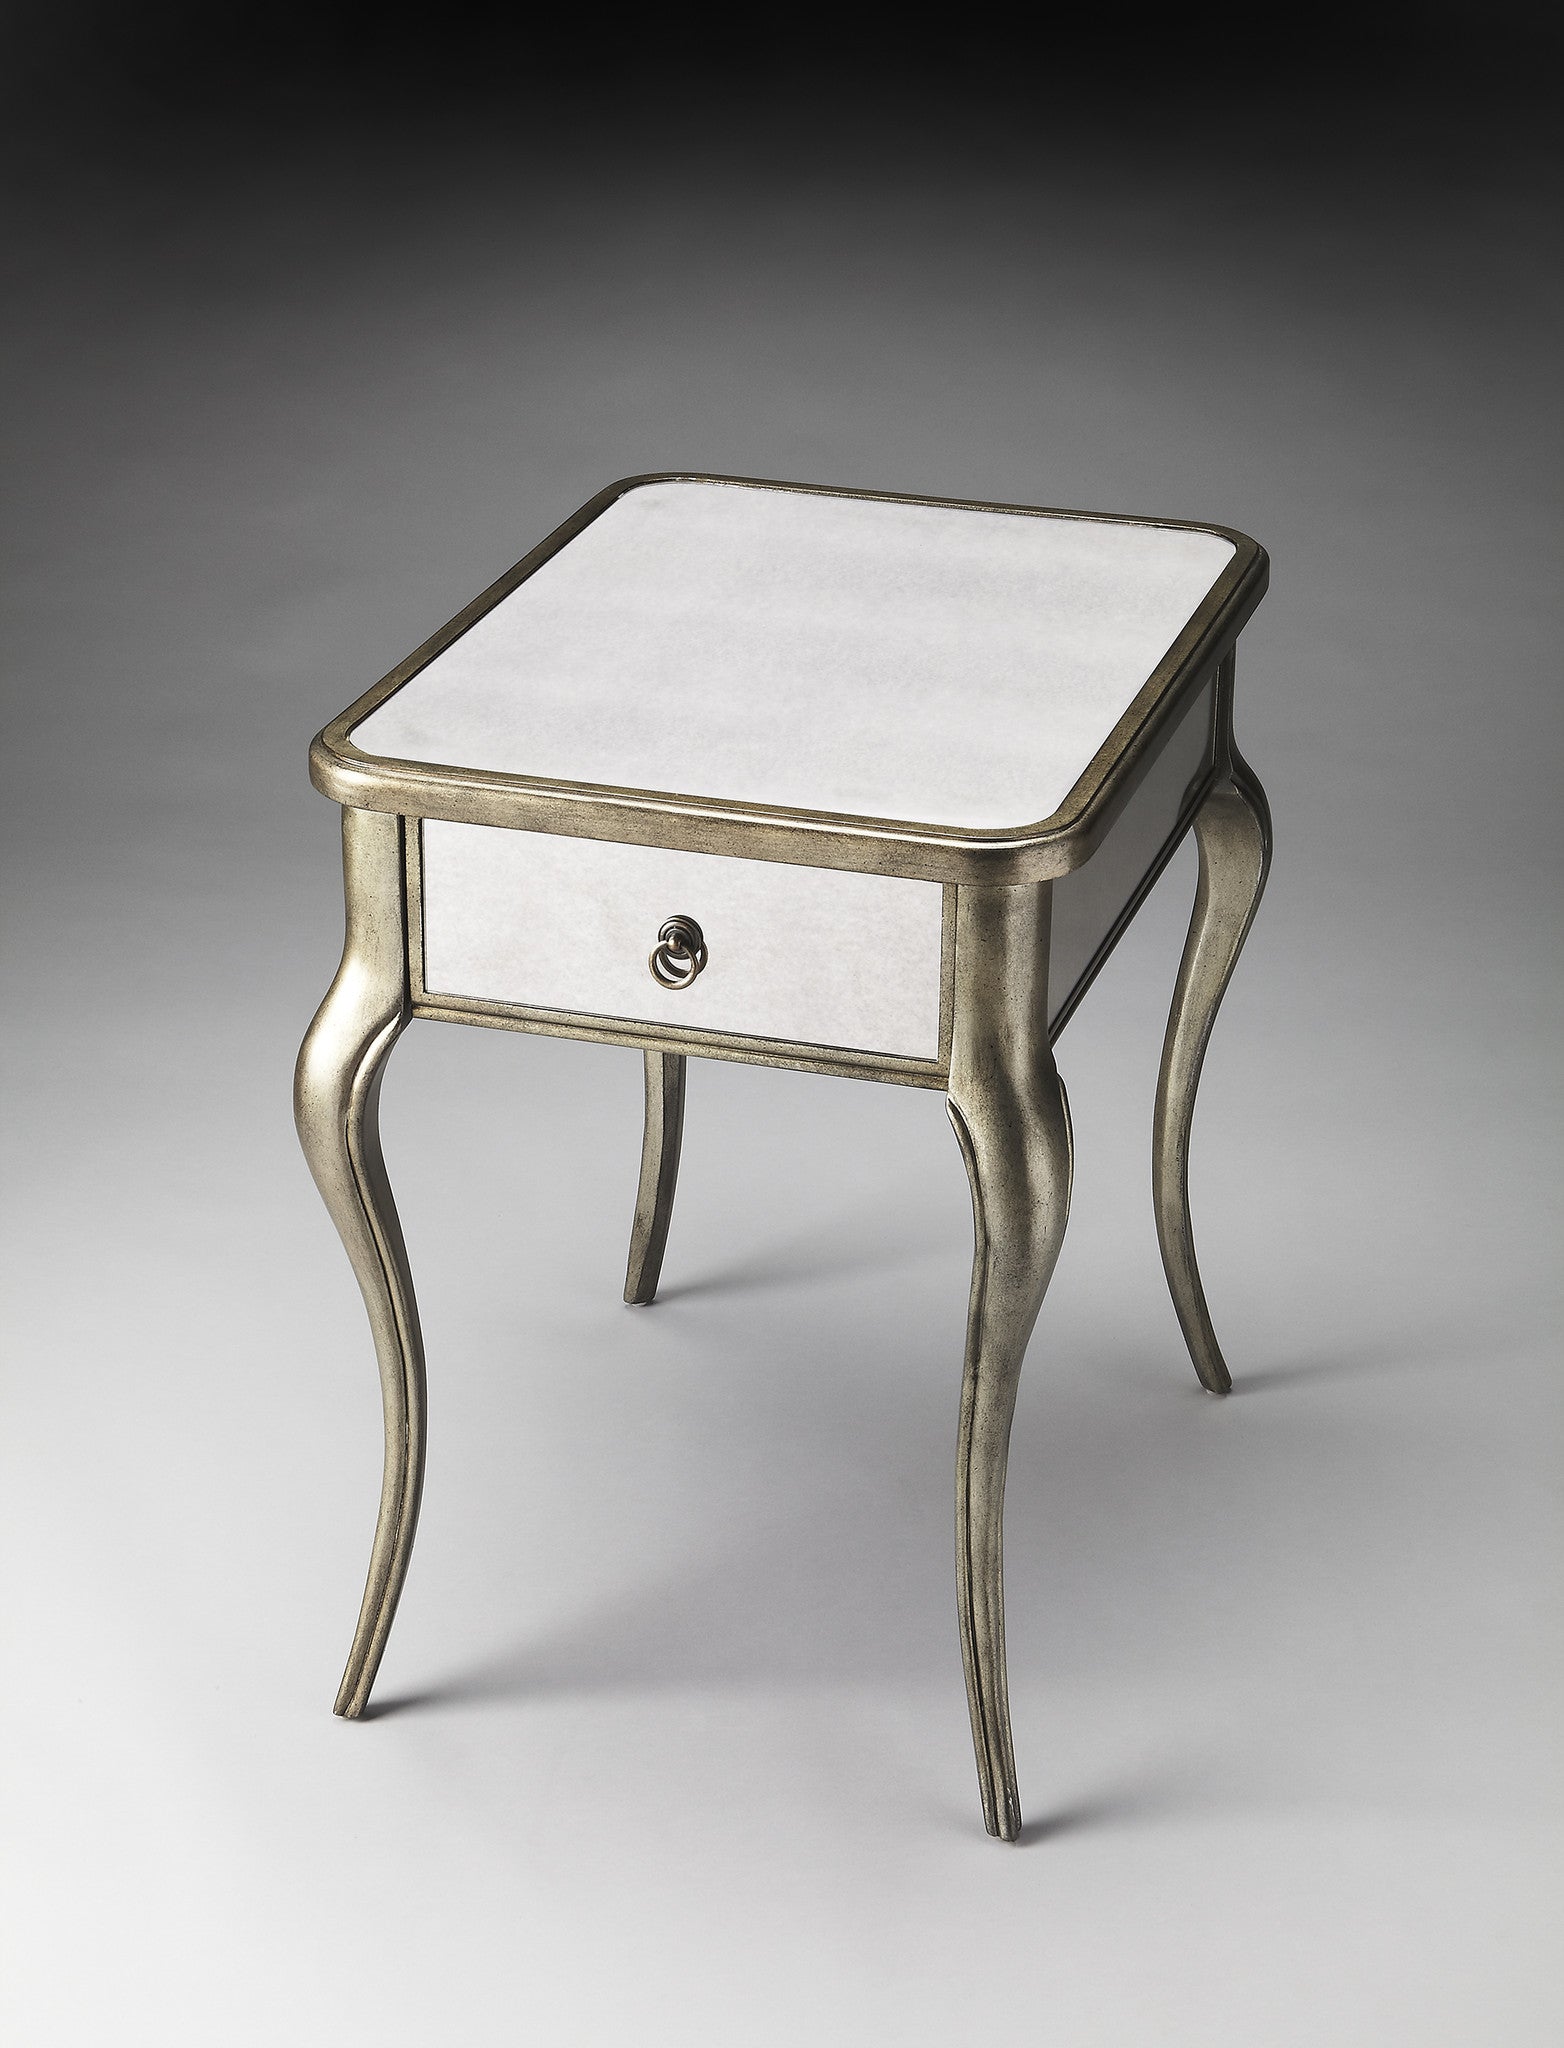 Teague Mirrored Side Table